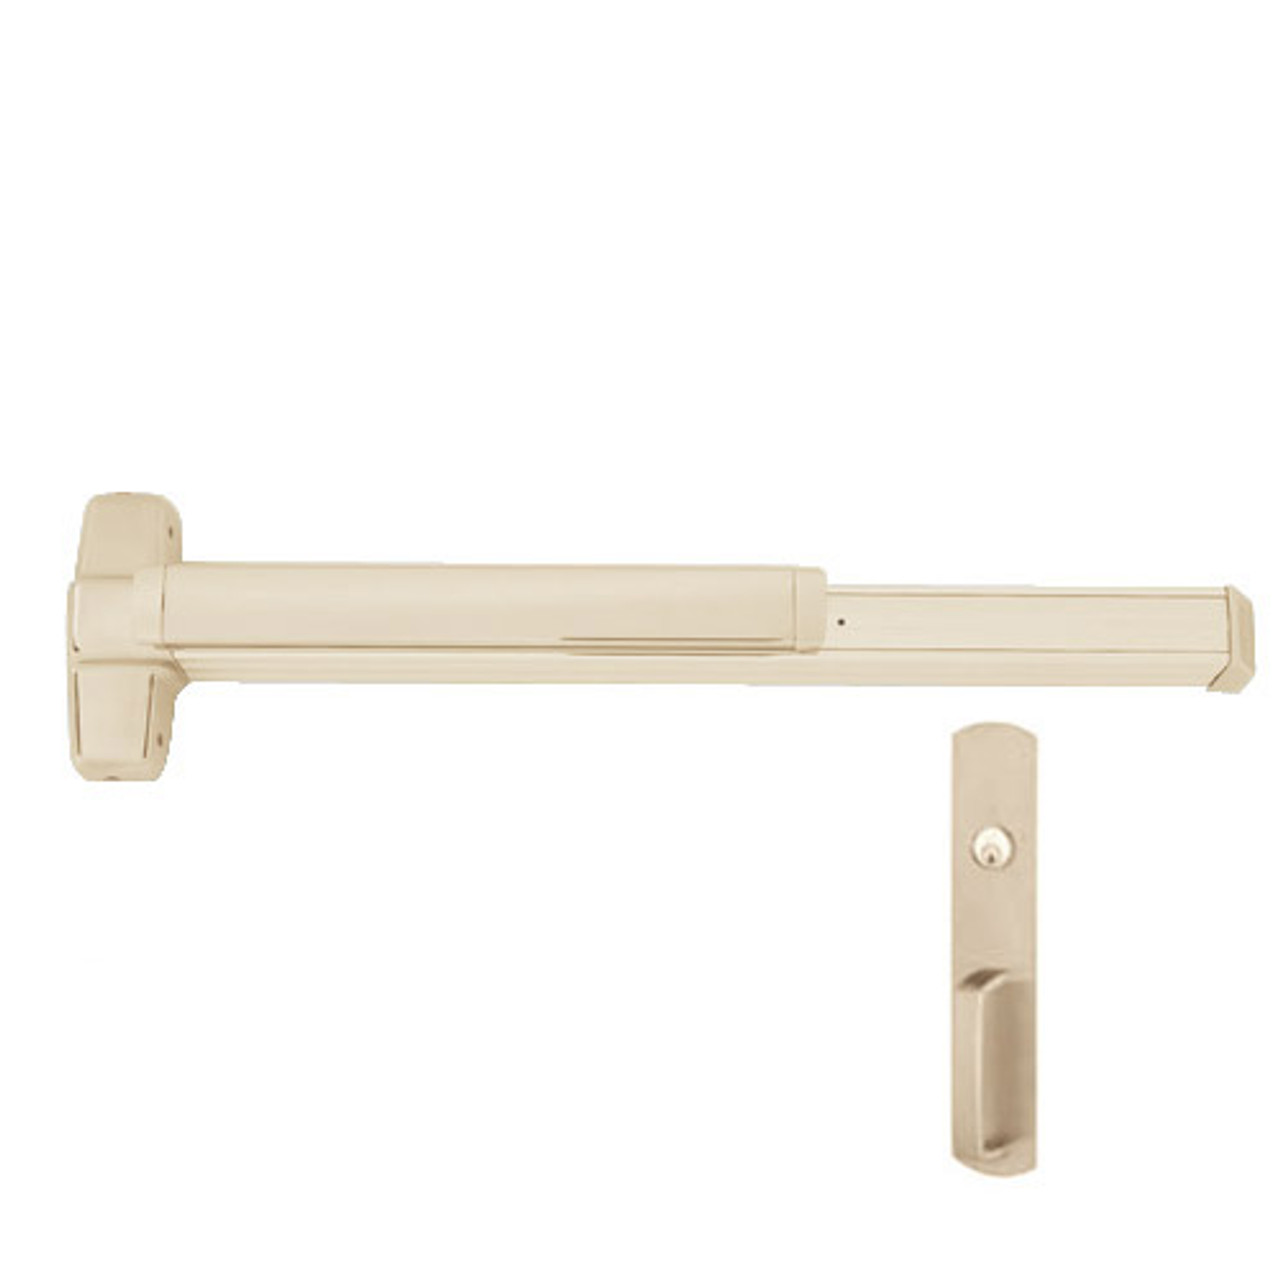 EL9847WDC-NL-US4-4 Von Duprin Exit Device with Electric Latch Retraction in Satin Brass